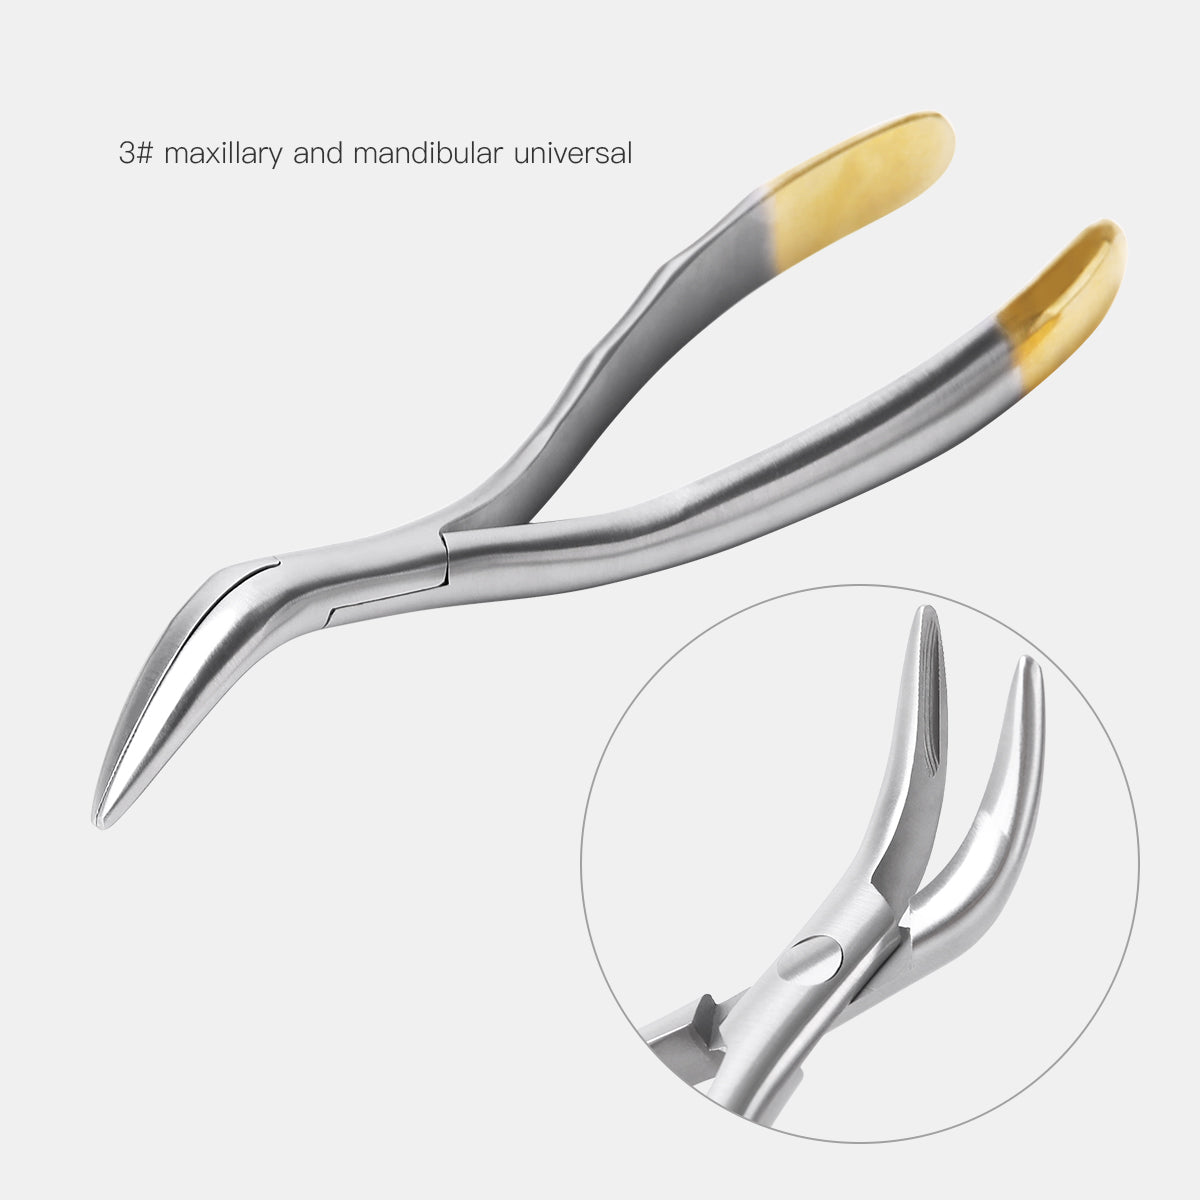 Azdent #3 Upper and Lower Teeth Root Fragment Minimally Invasive Extraction Forceps - azdentall.com